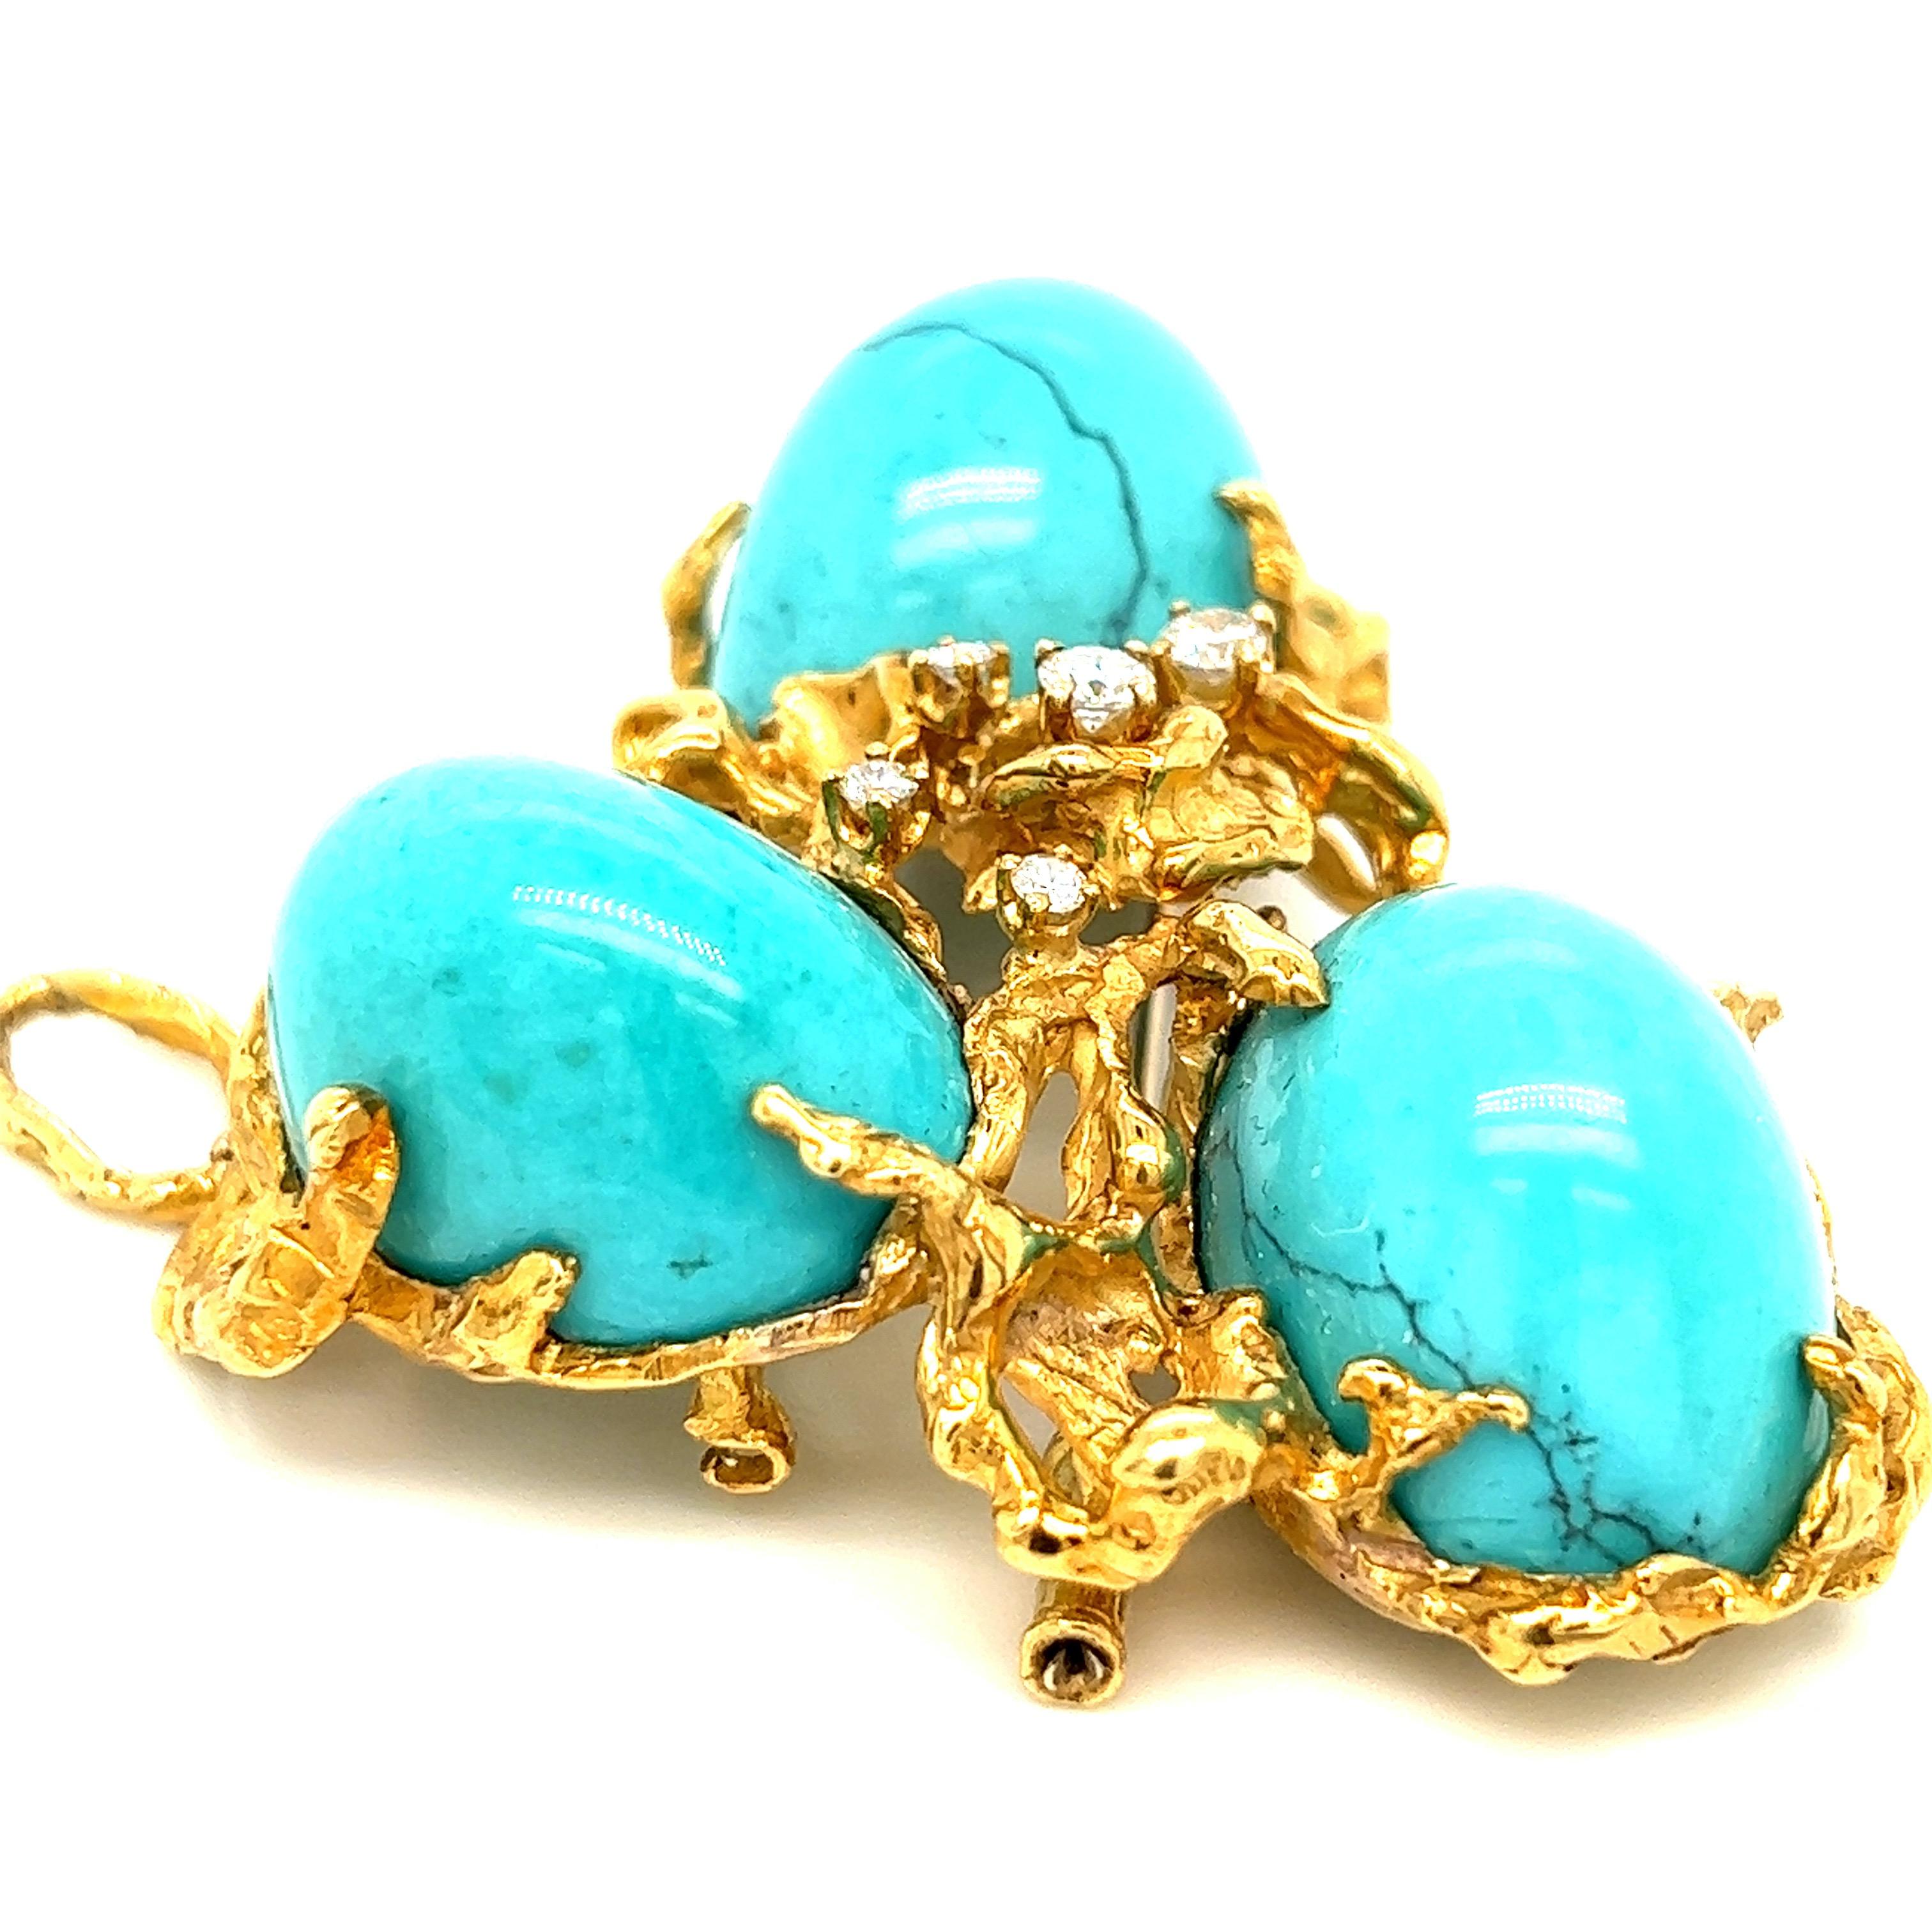 Cabochon Arthur King Turquoise Gold Pendant Brooch For Sale